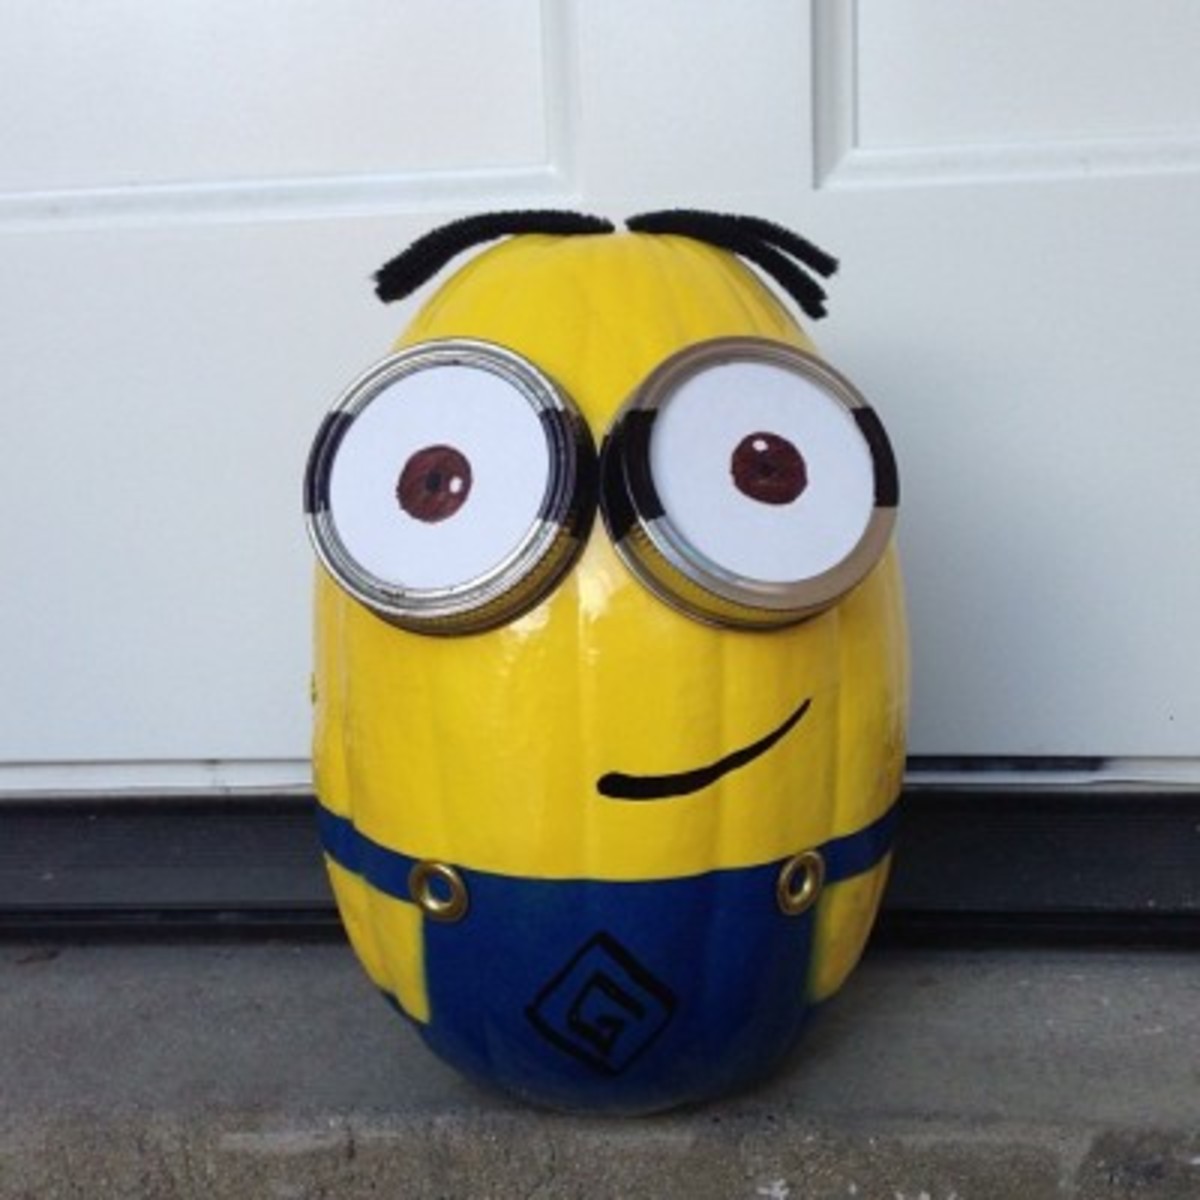 How to Spray Paint Minion Pumpkins for Halloween - Today's Mama